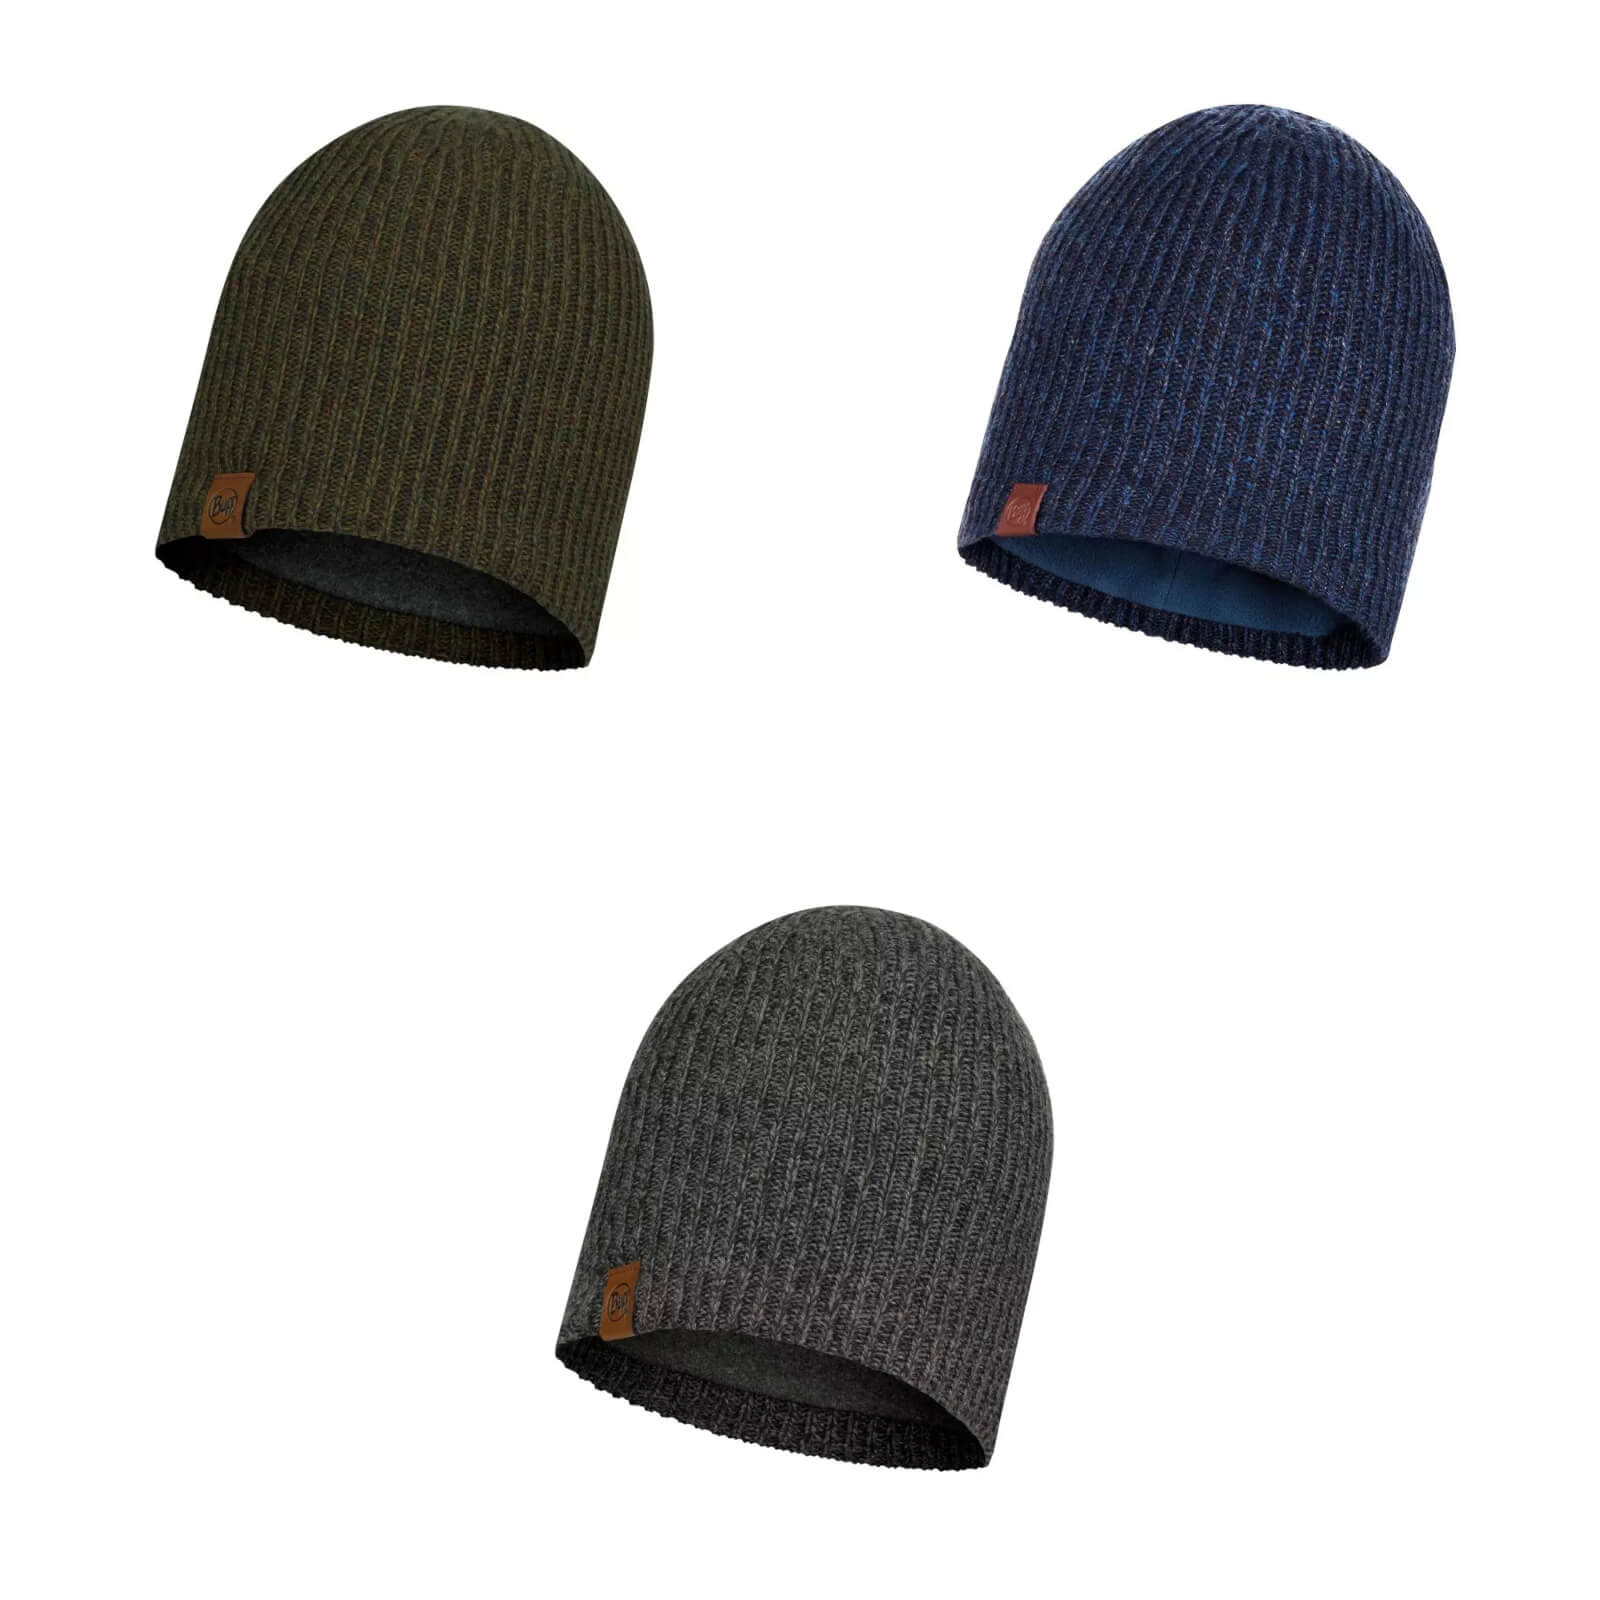 BUFF Knitted and Full Fleece Lyne Beanie Hat Collection